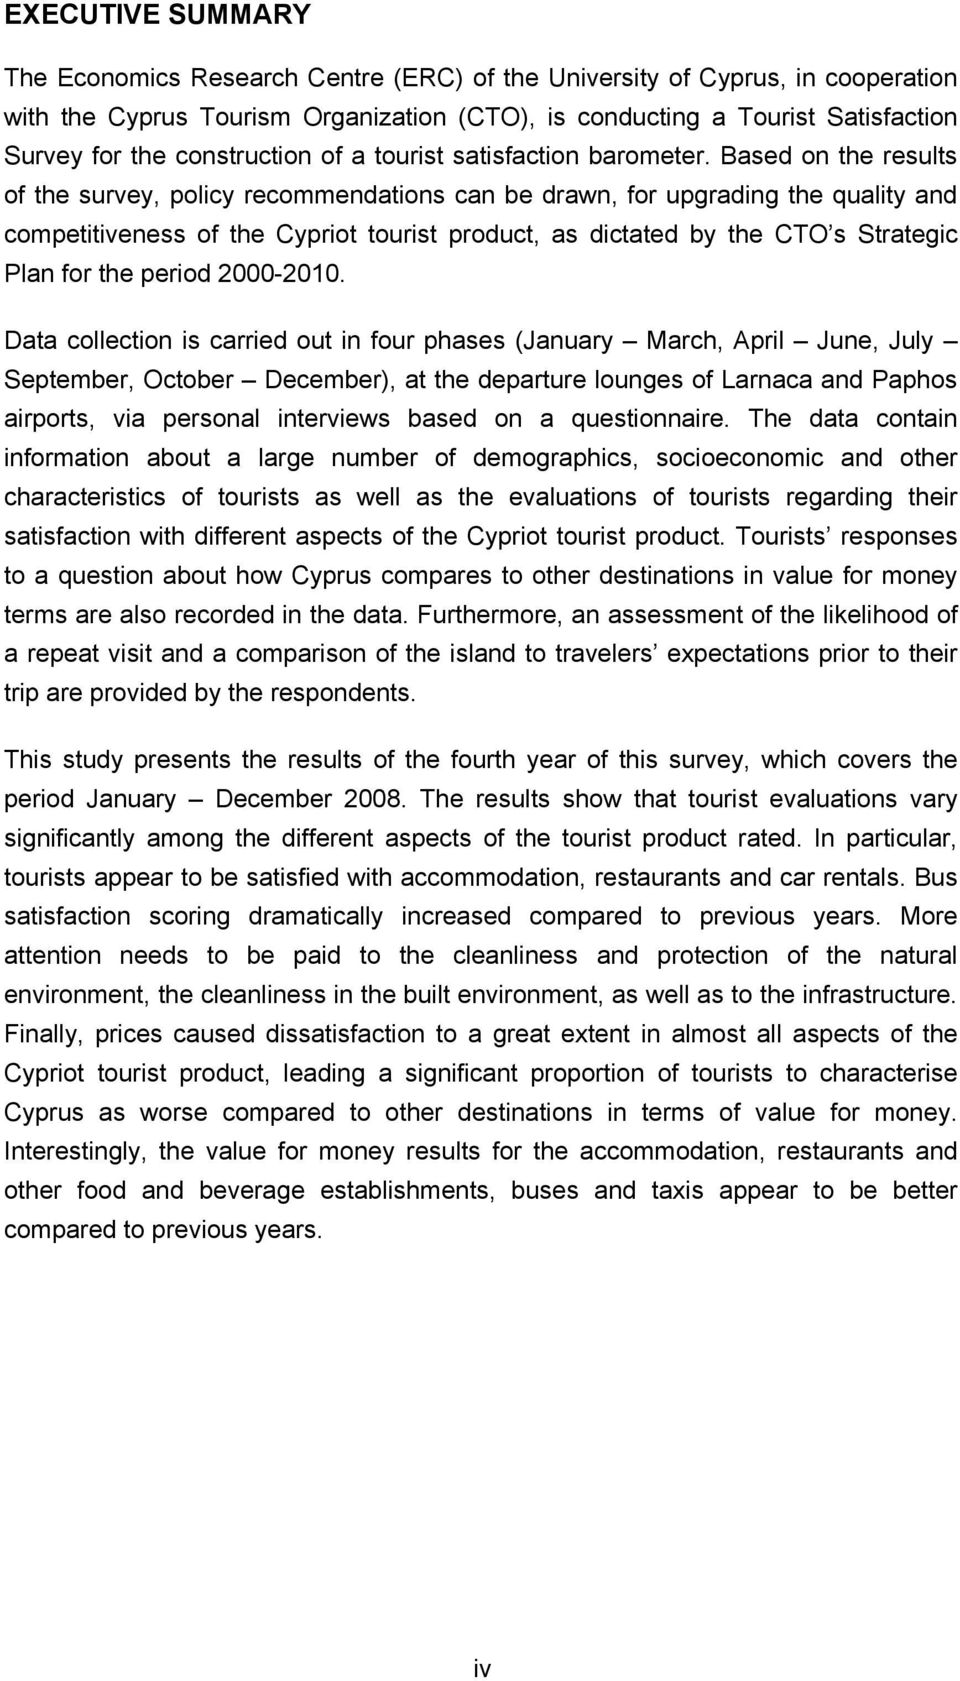 Based on the results of the survey, policy recommendations can be drawn, for upgrading the quality and competitiveness of the Cypriot tourist product, as dictated by the CTO s Strategic Plan for the